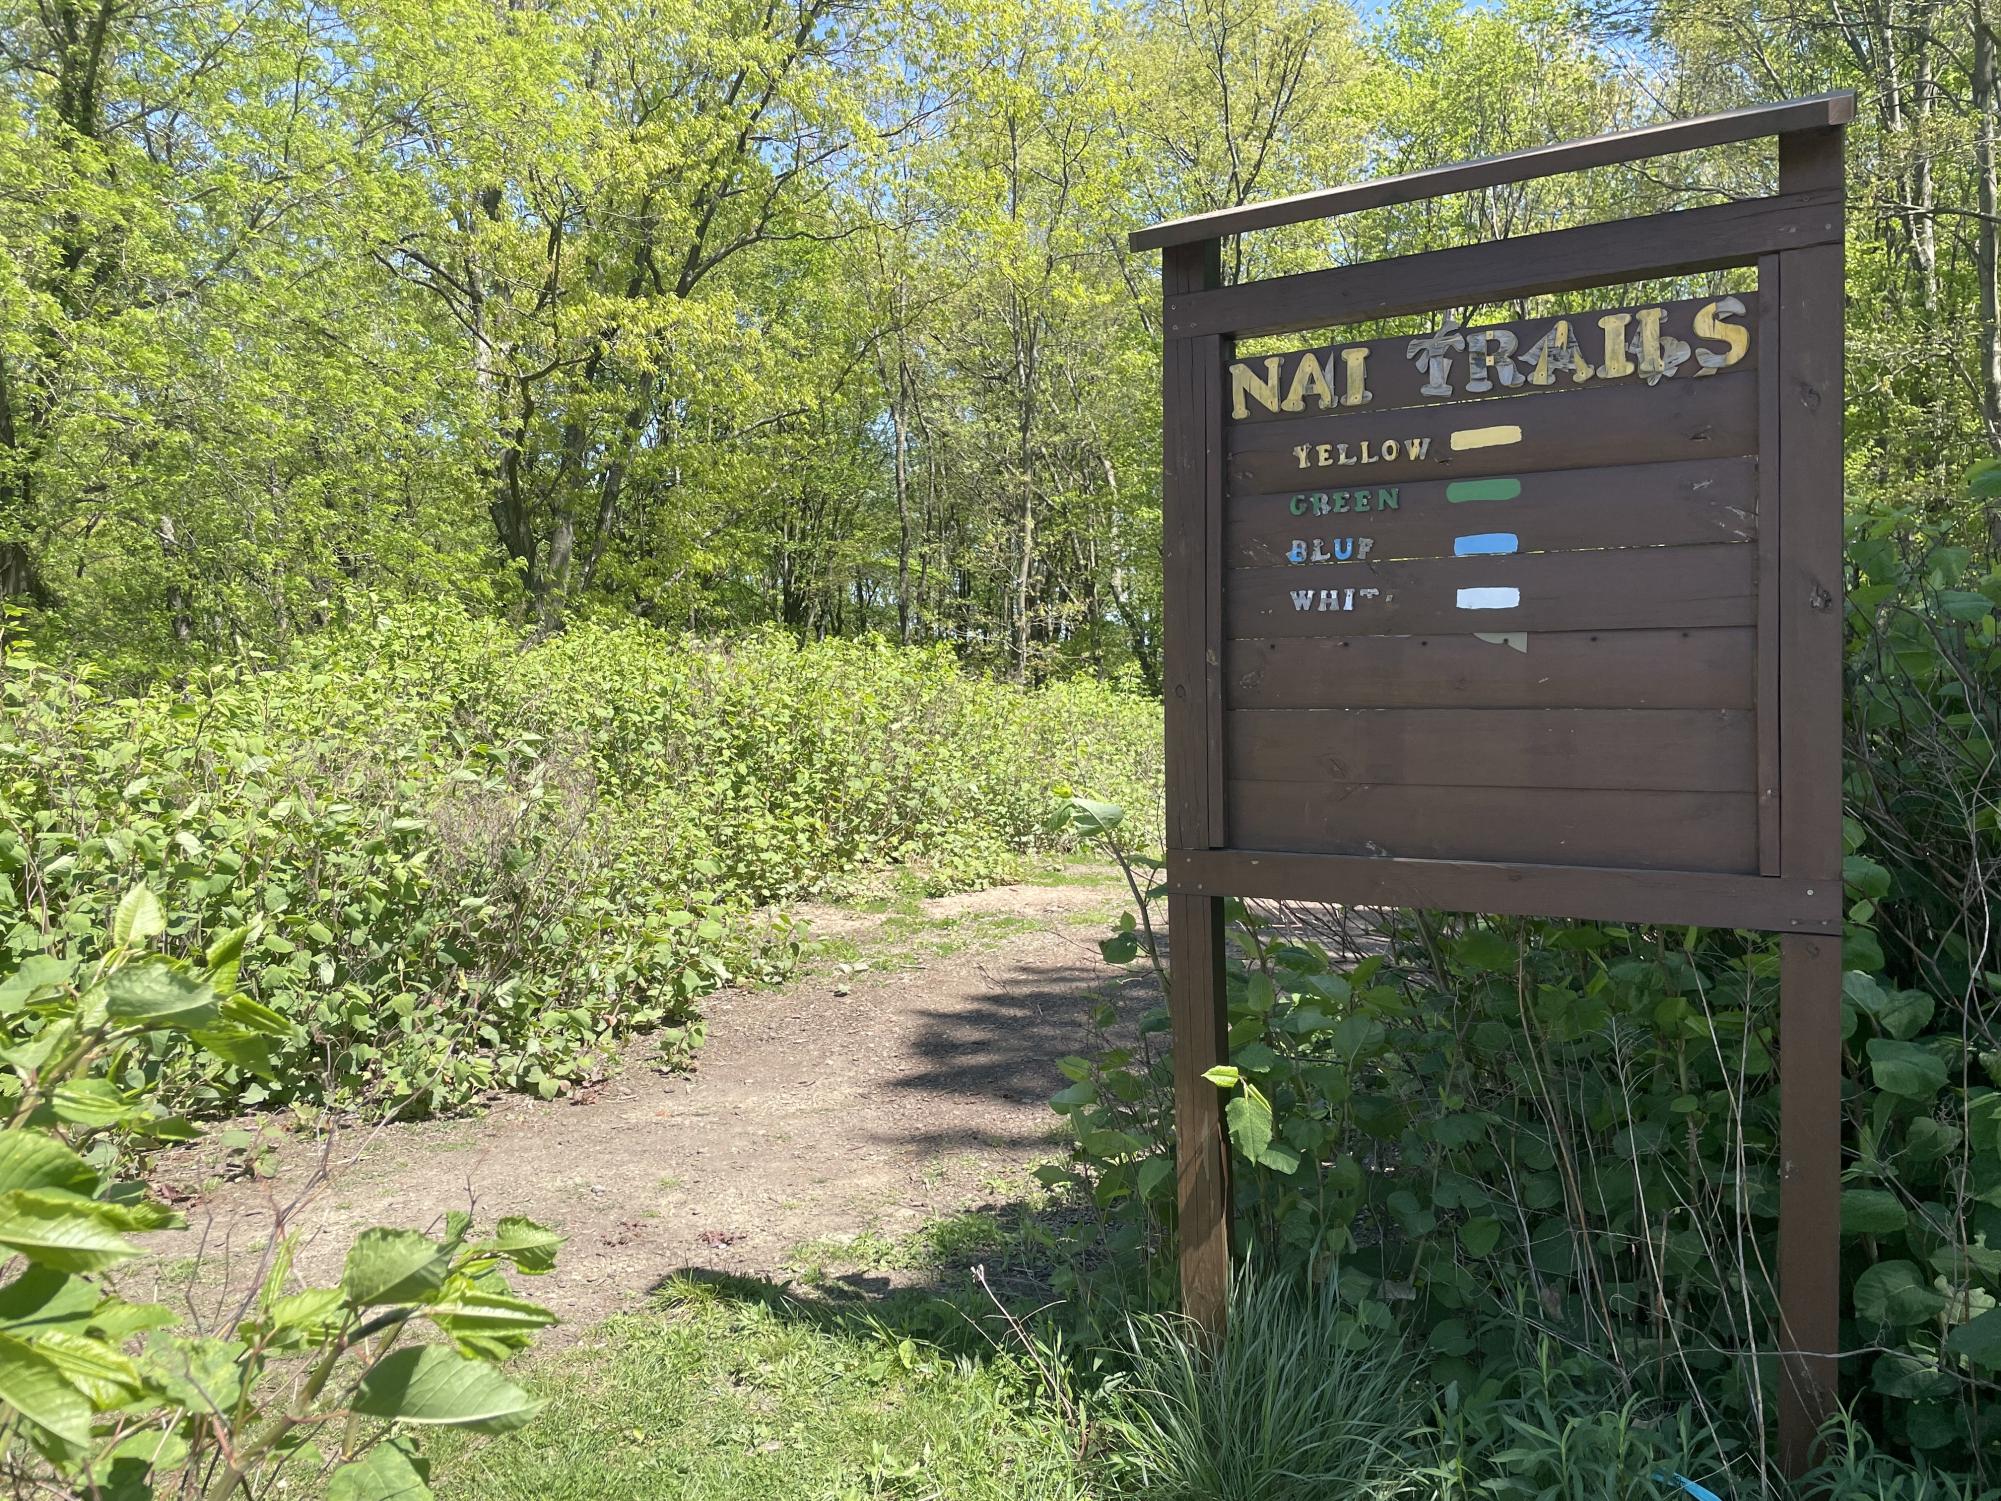 The NAI entrance to the NA trail system.